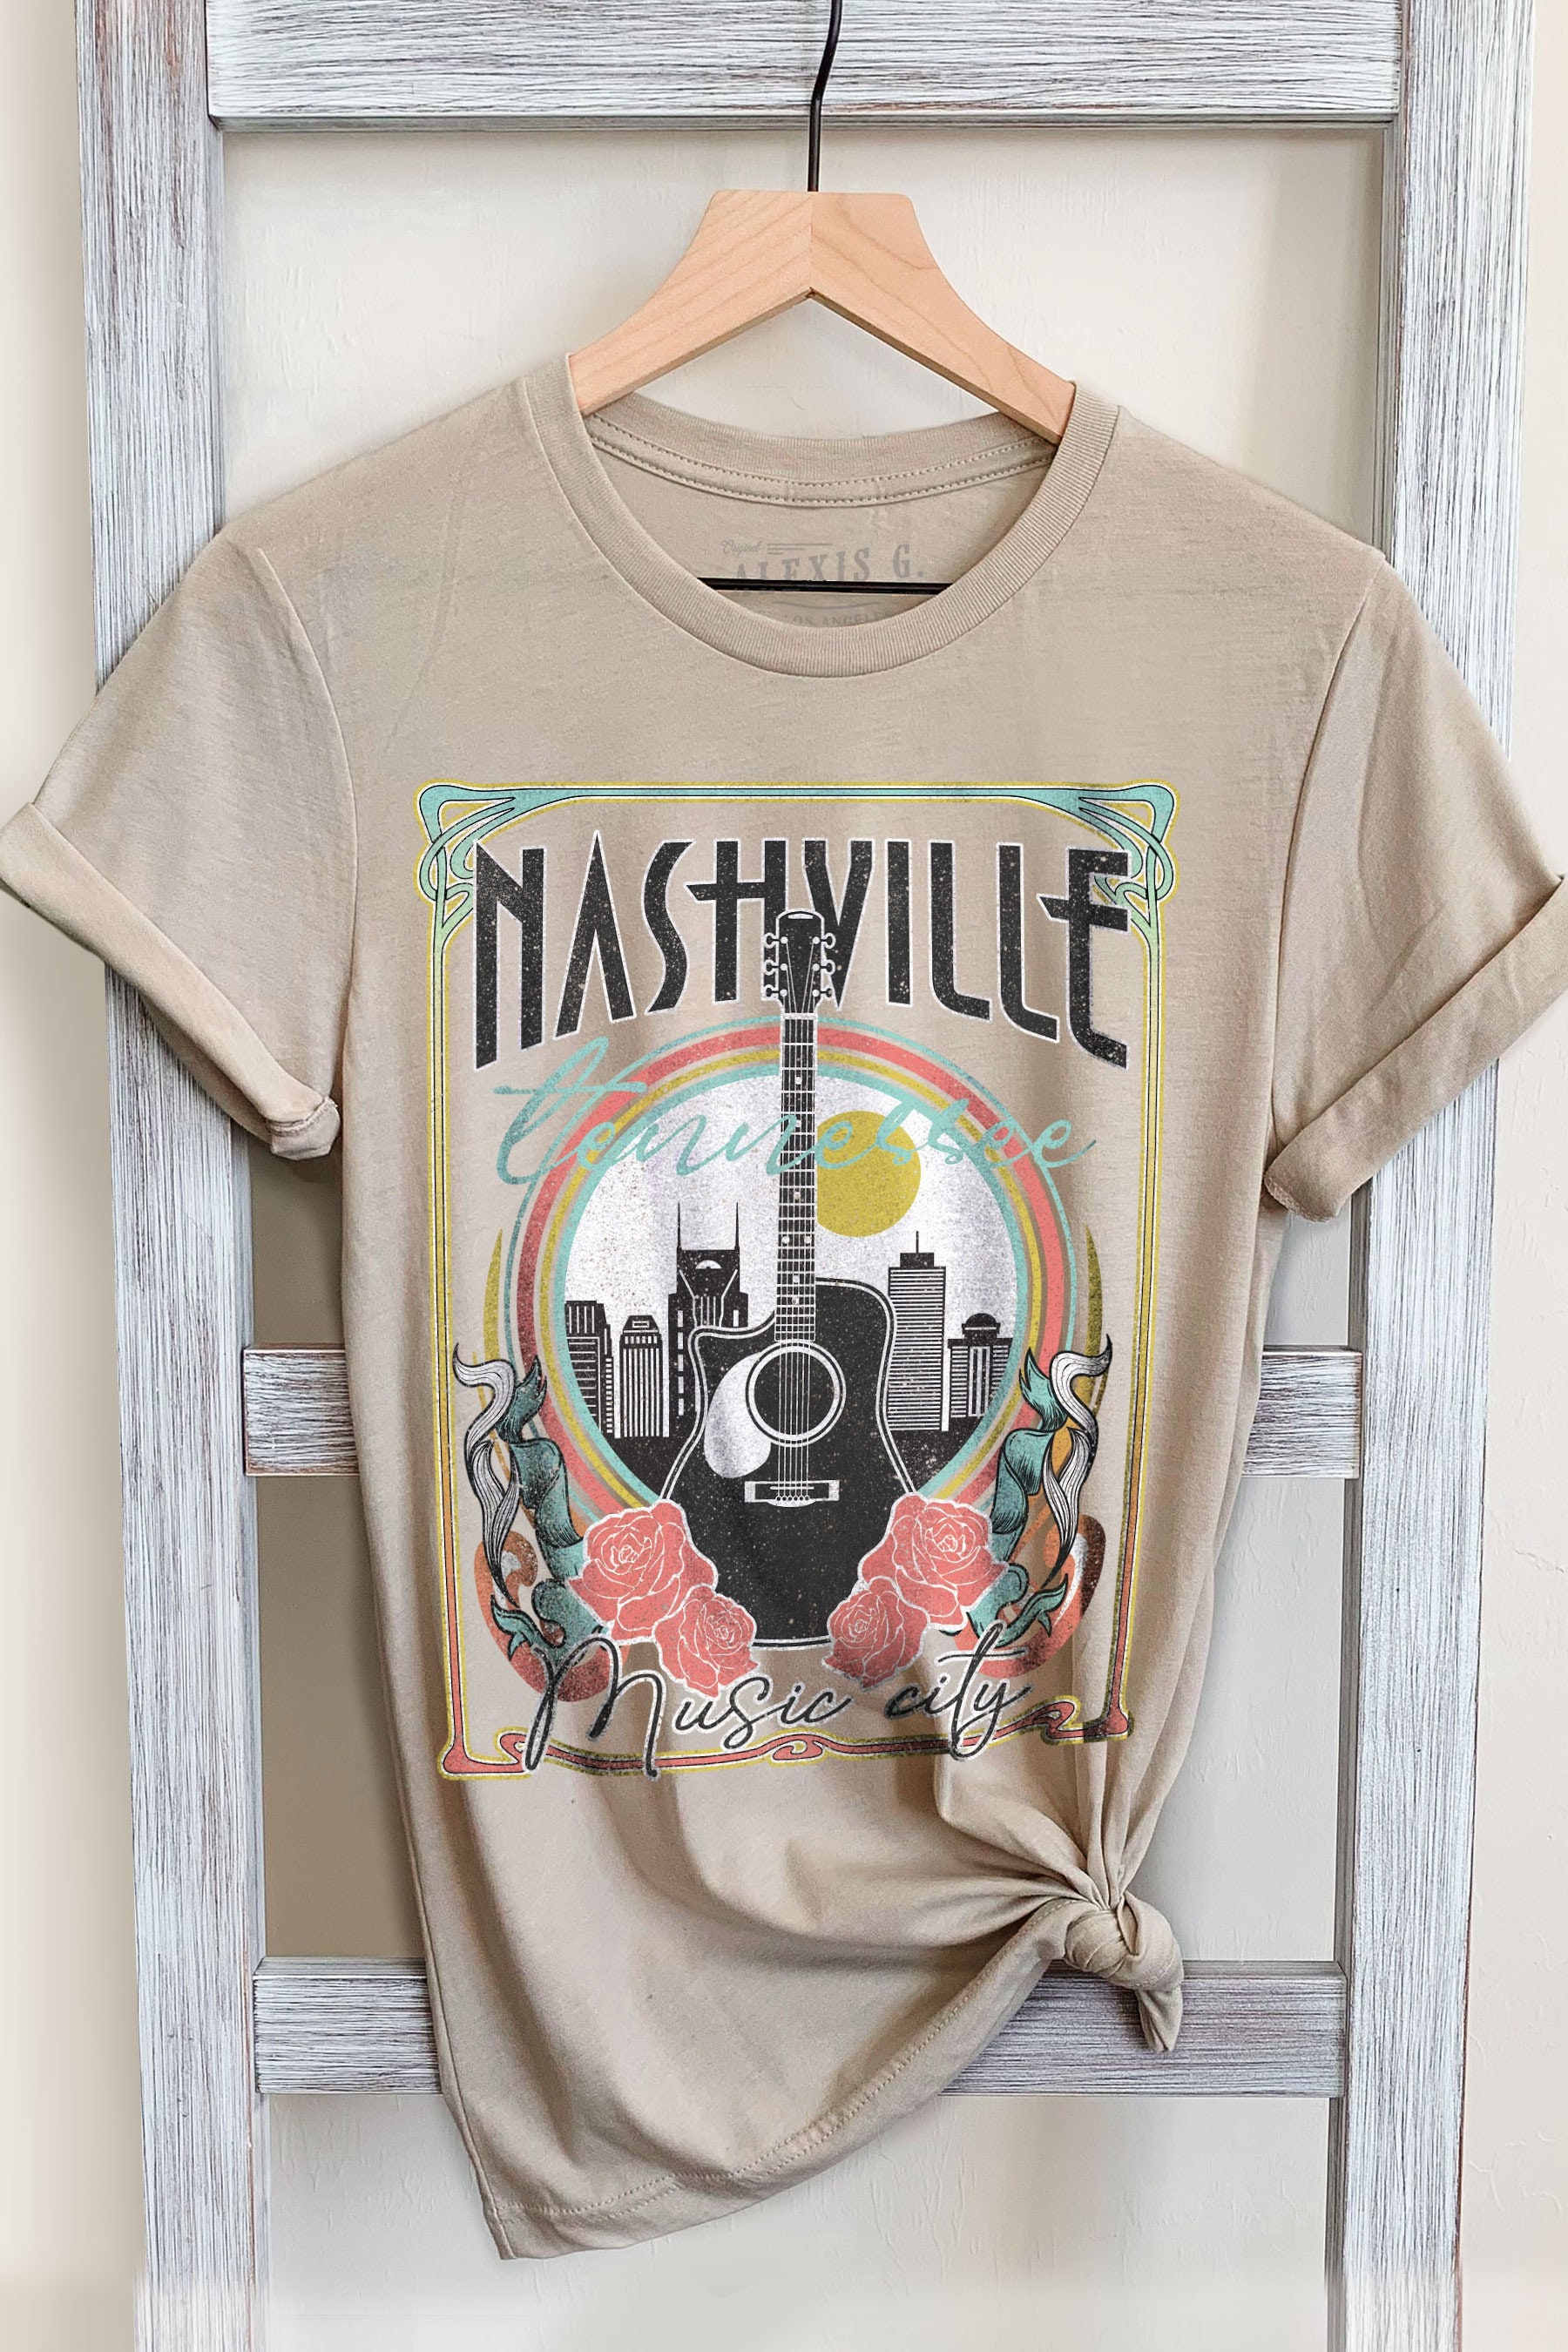 Discover Nashville Music City Graphic Tee, Country Music T Shirt, Nashville Shirt